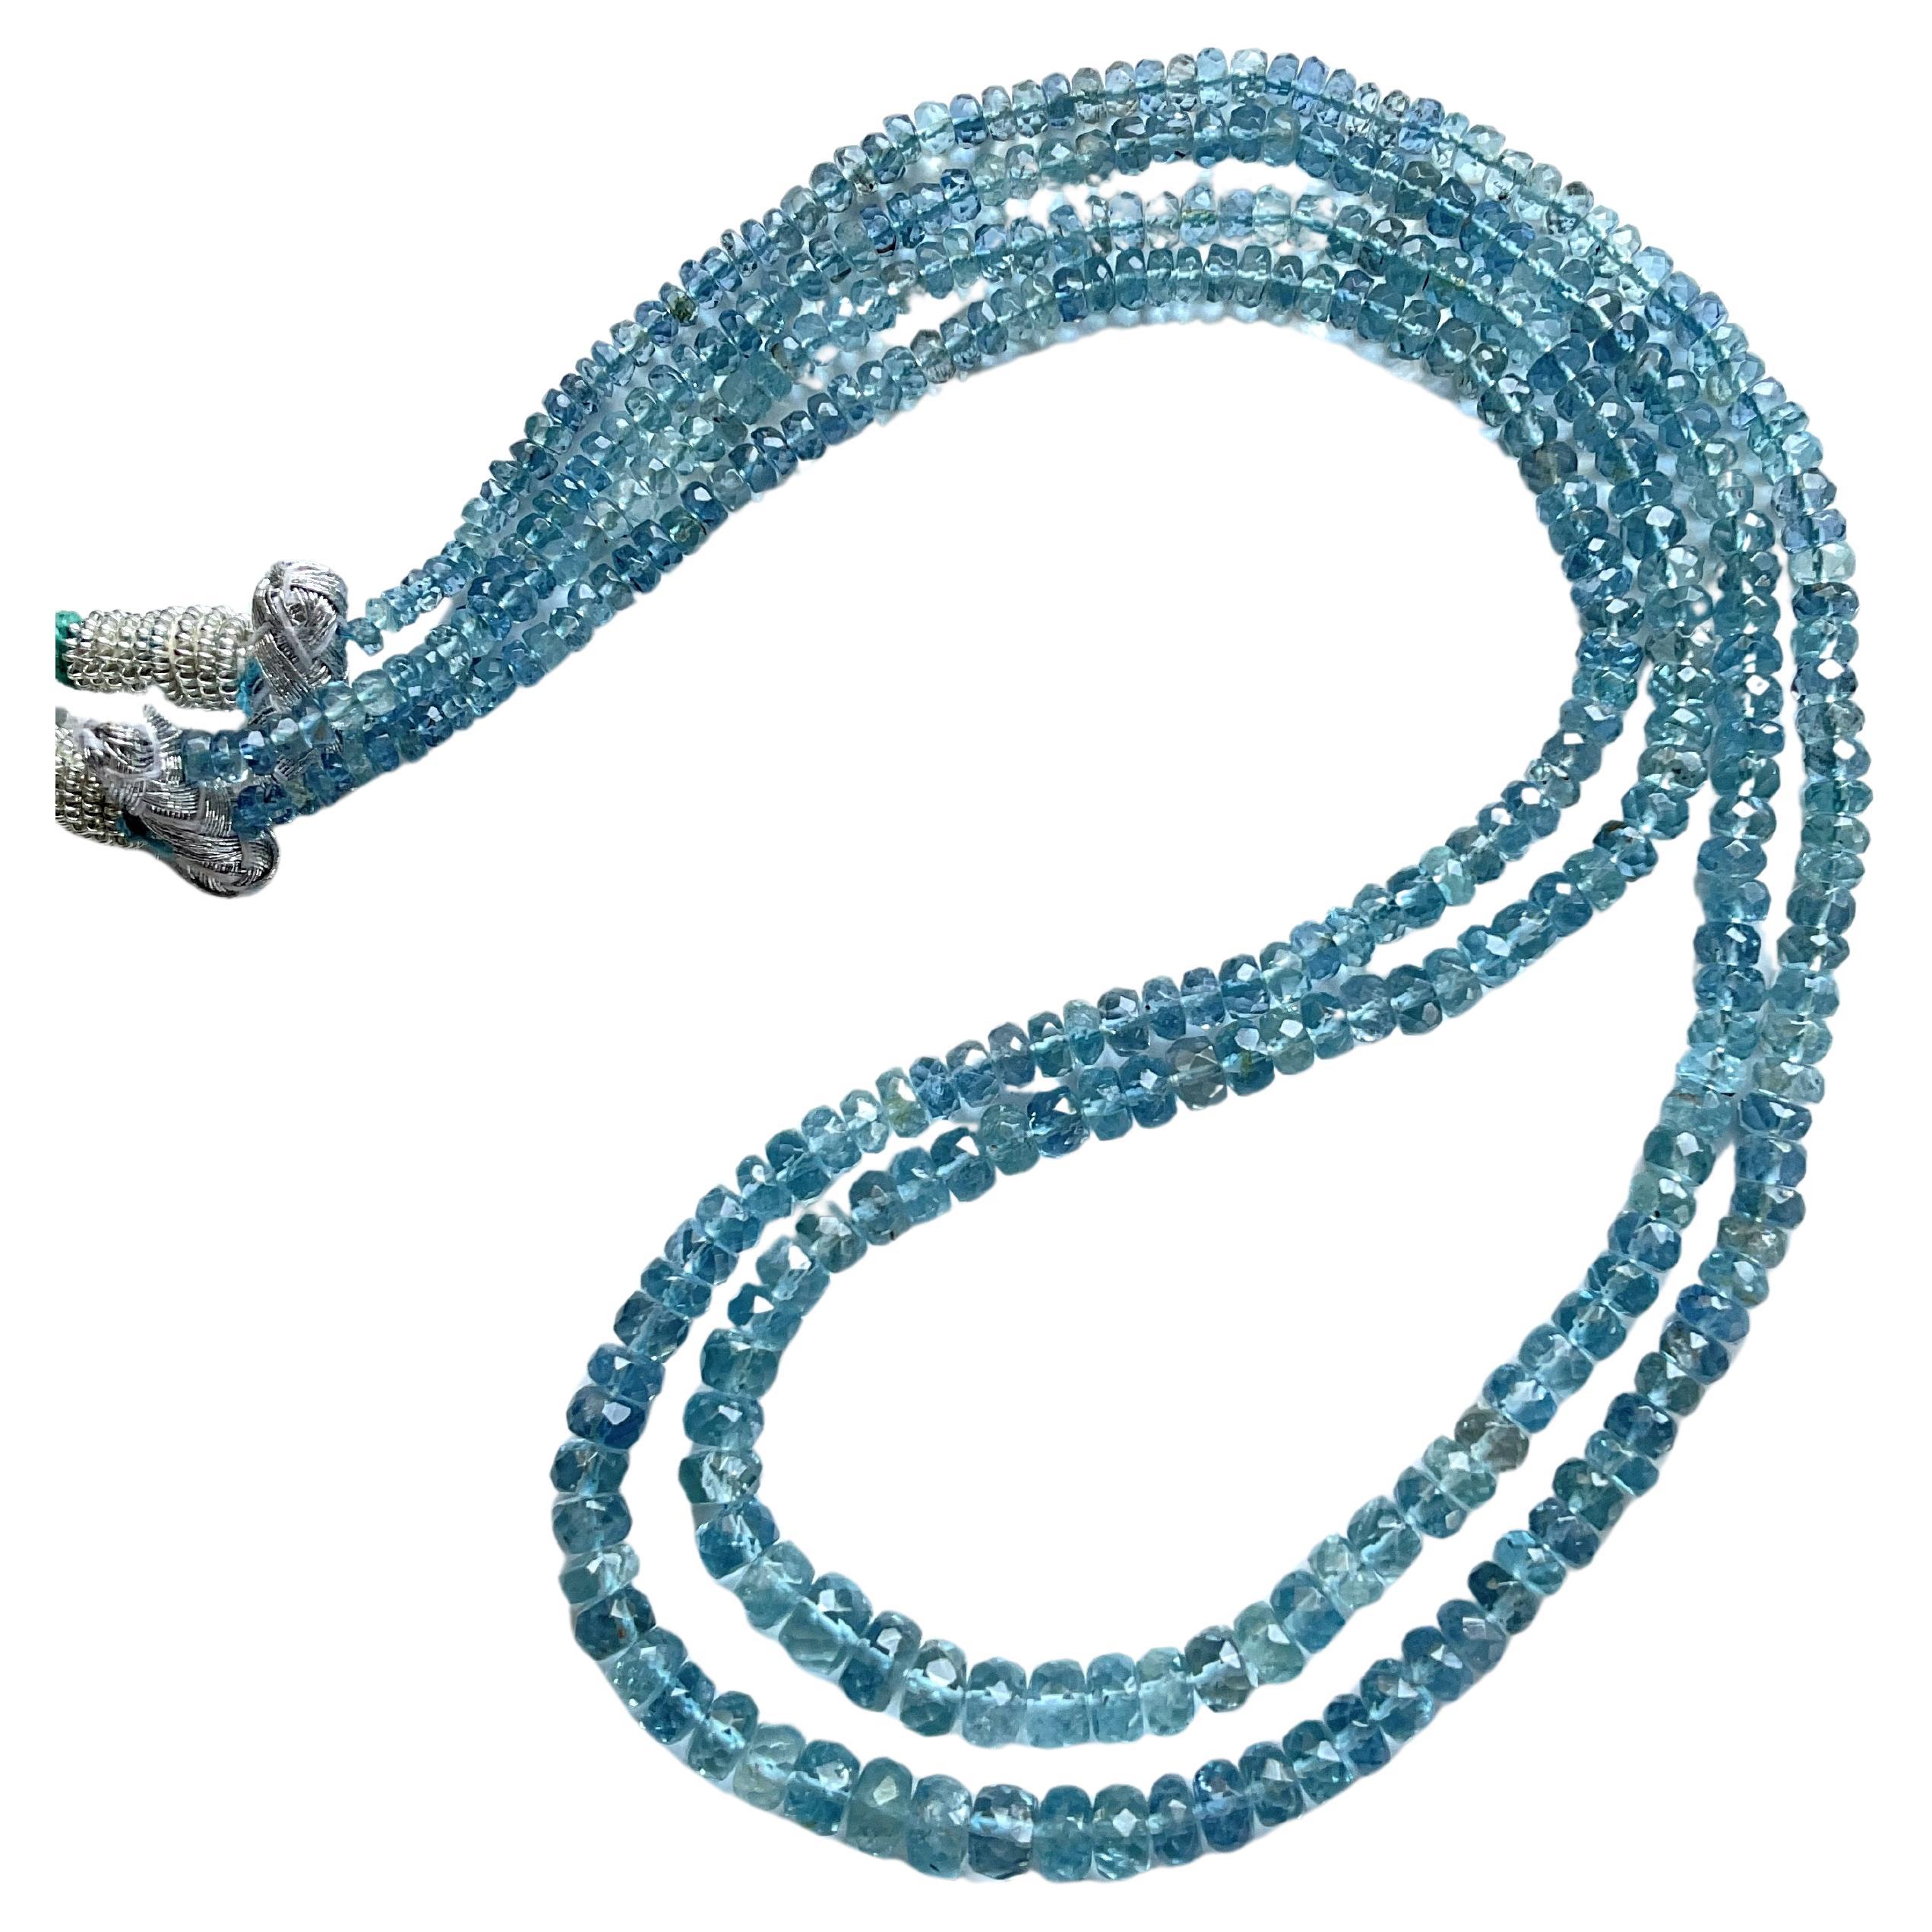 117.90 carats Aquamarine Beaded Necklace 2 Strand Faceted Beads good Quality Gem For Sale